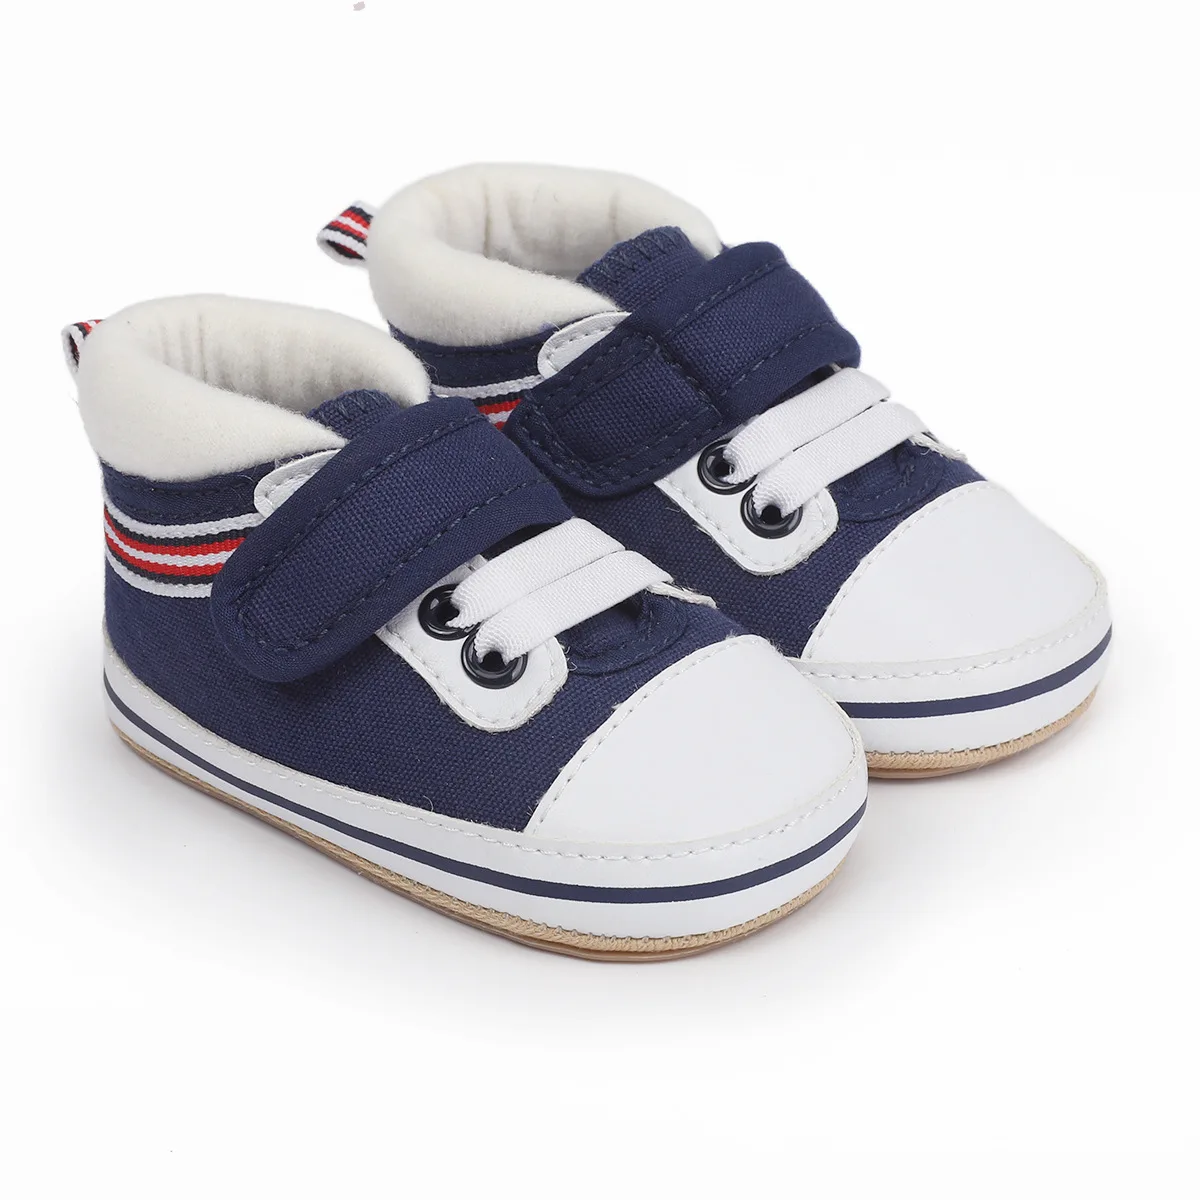 Baby Shoes First Walkers 2022 Sneakers Toddler Infants Shoes bebek ayakkabi Baby Boys Shoes Soft Sole Anti-Slip Canvas Sneaker